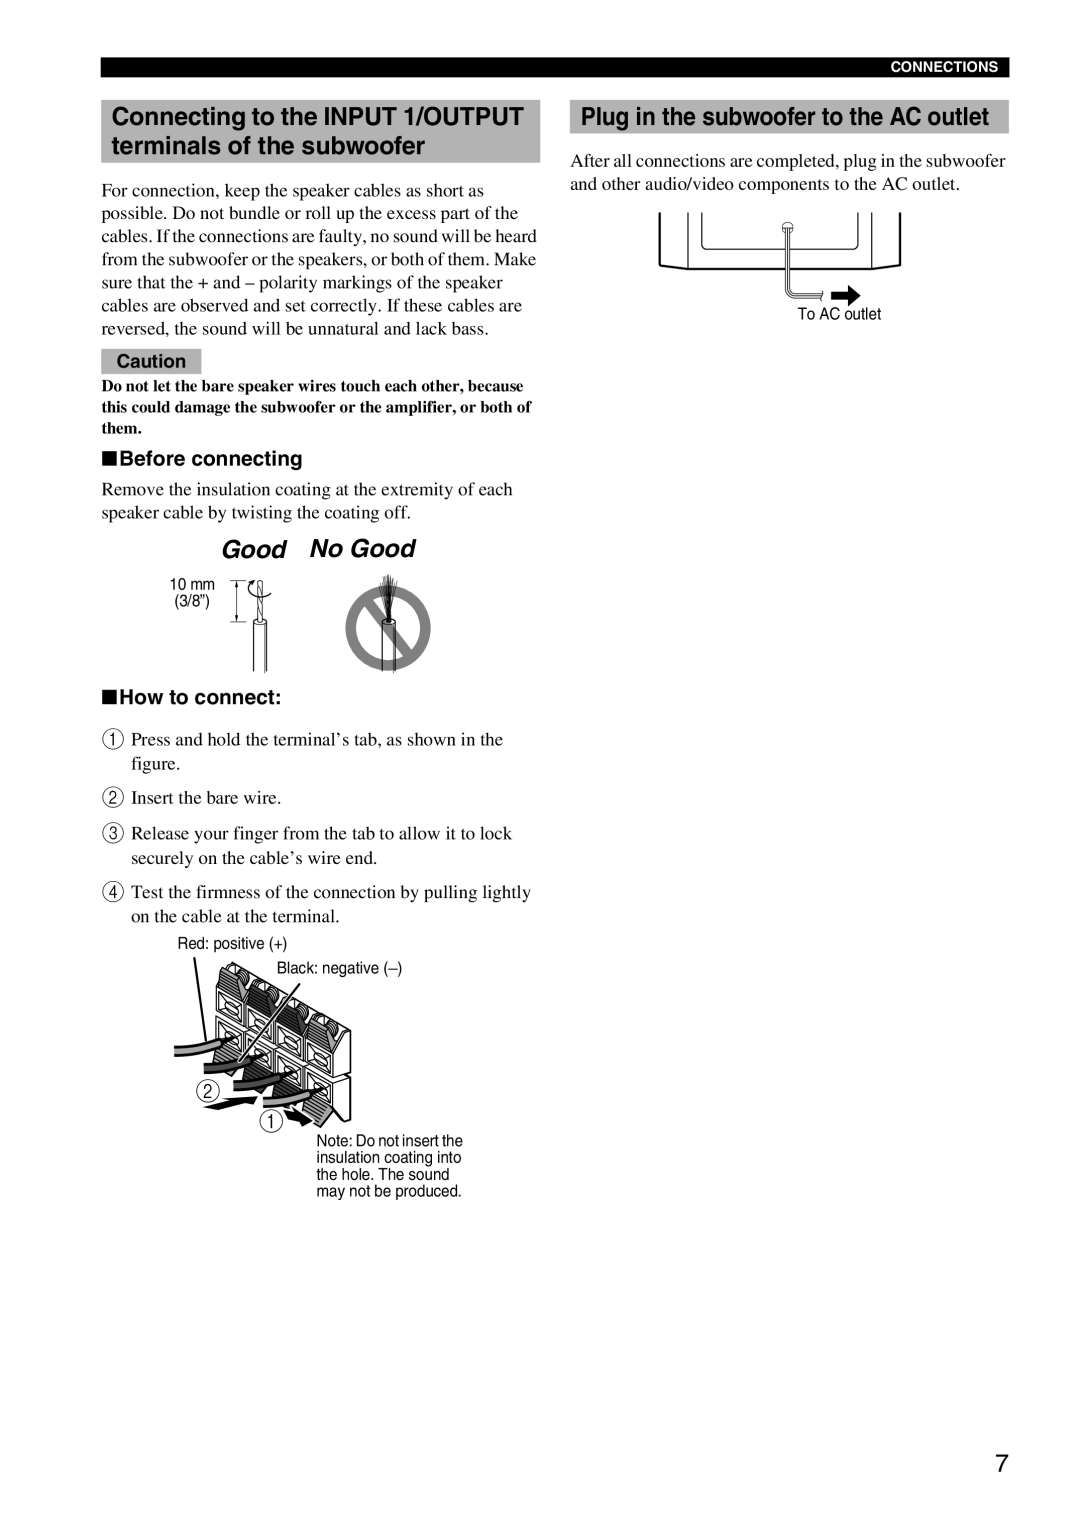 Yamaha HTR-5940 AV owner manual Good No Good, Plug in the subwoofer to the AC outlet, Before connecting, How to connect 